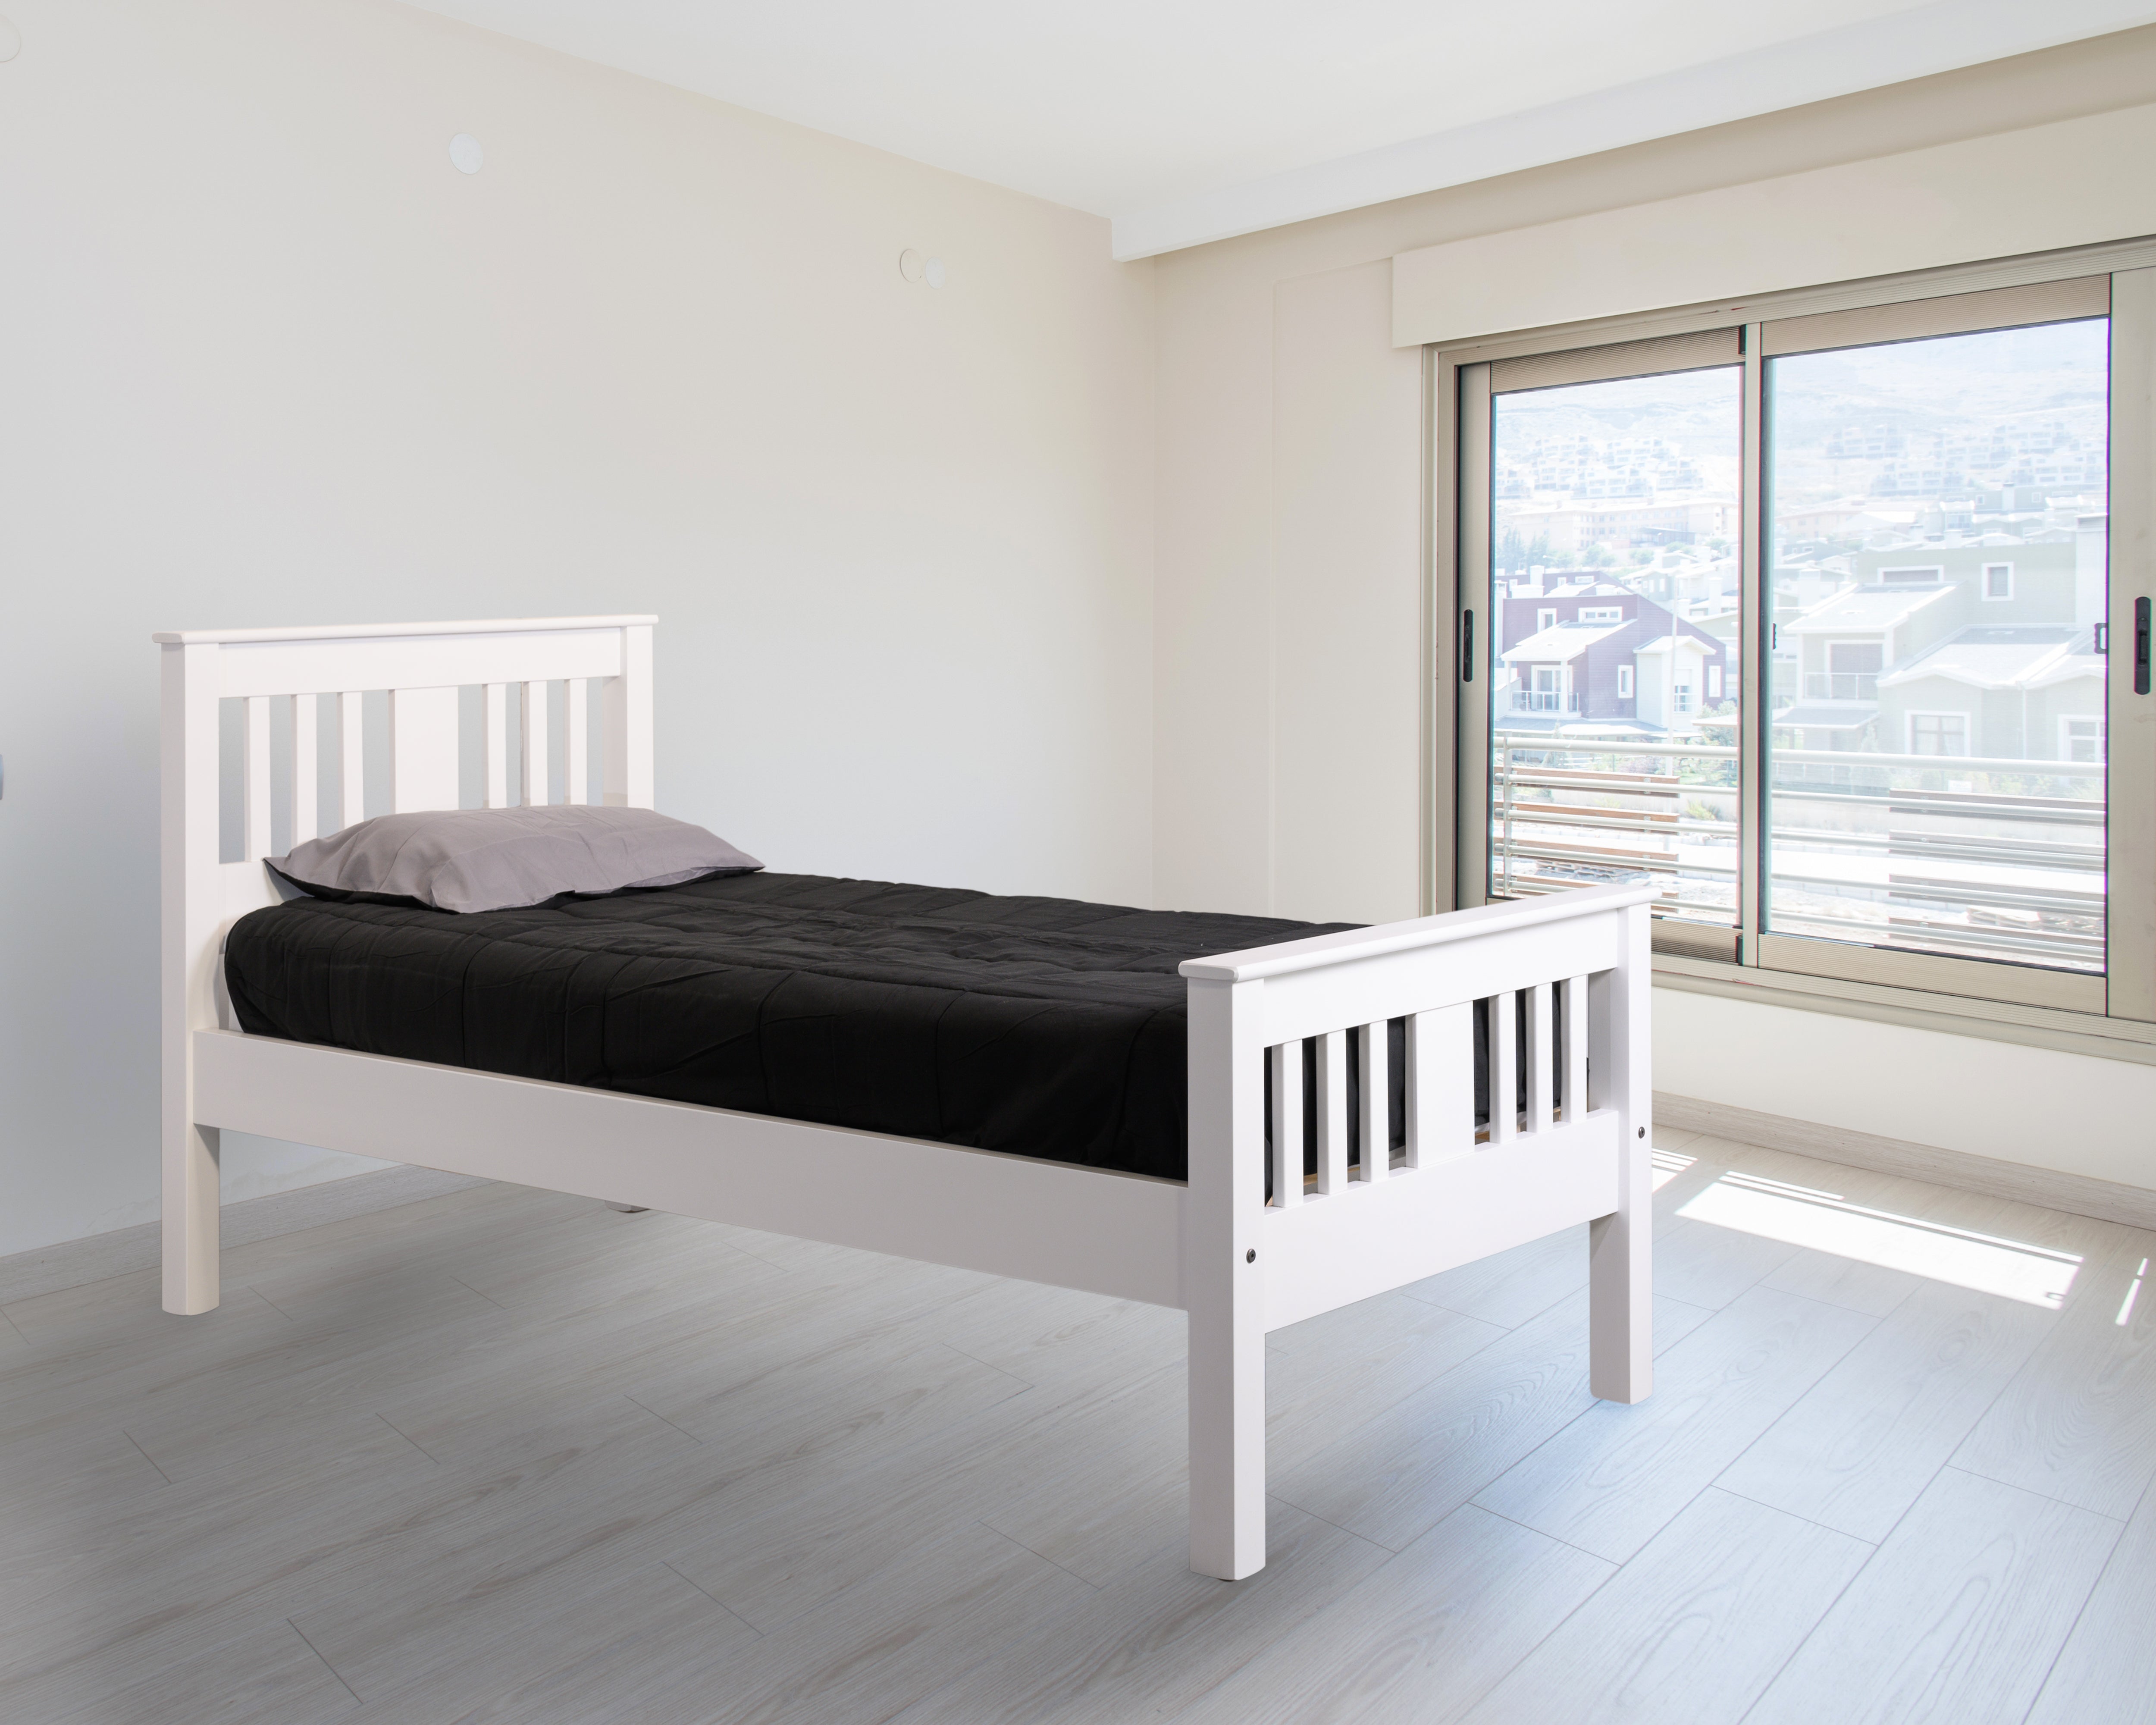 WENTWORTH SLAT BED - NZ MADE | ALL SIZES